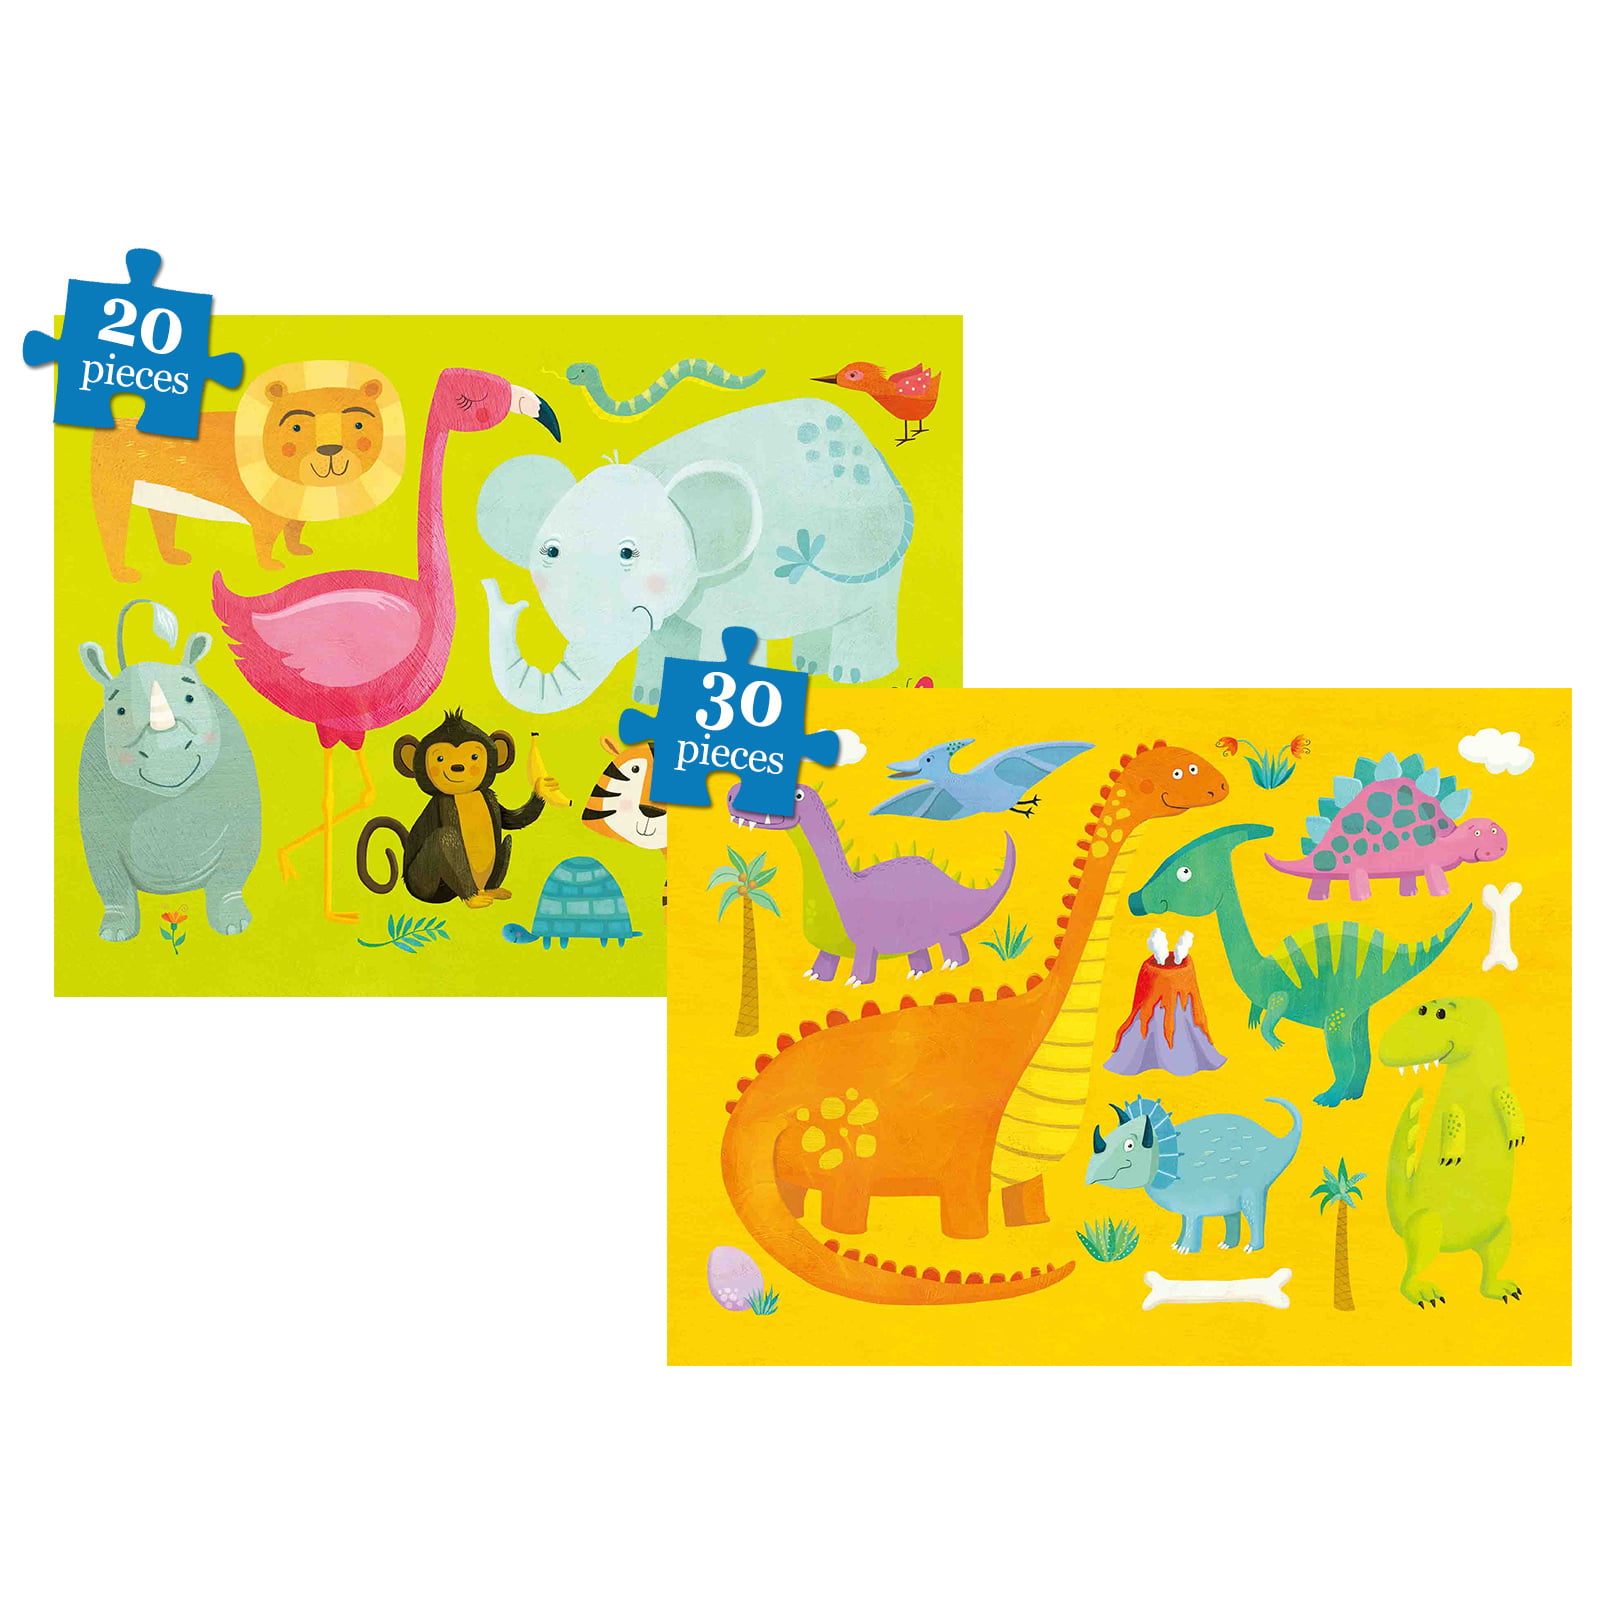 Large Puzzle for Boys & Girls 2 Pack Colorful Kids Floor Jigsaw Puzzles 20-30 Pieces Early Educational Preschool Toddler Puzzles Puzzles for Kids Ages 4-8 Year Old 2 Puzzles 